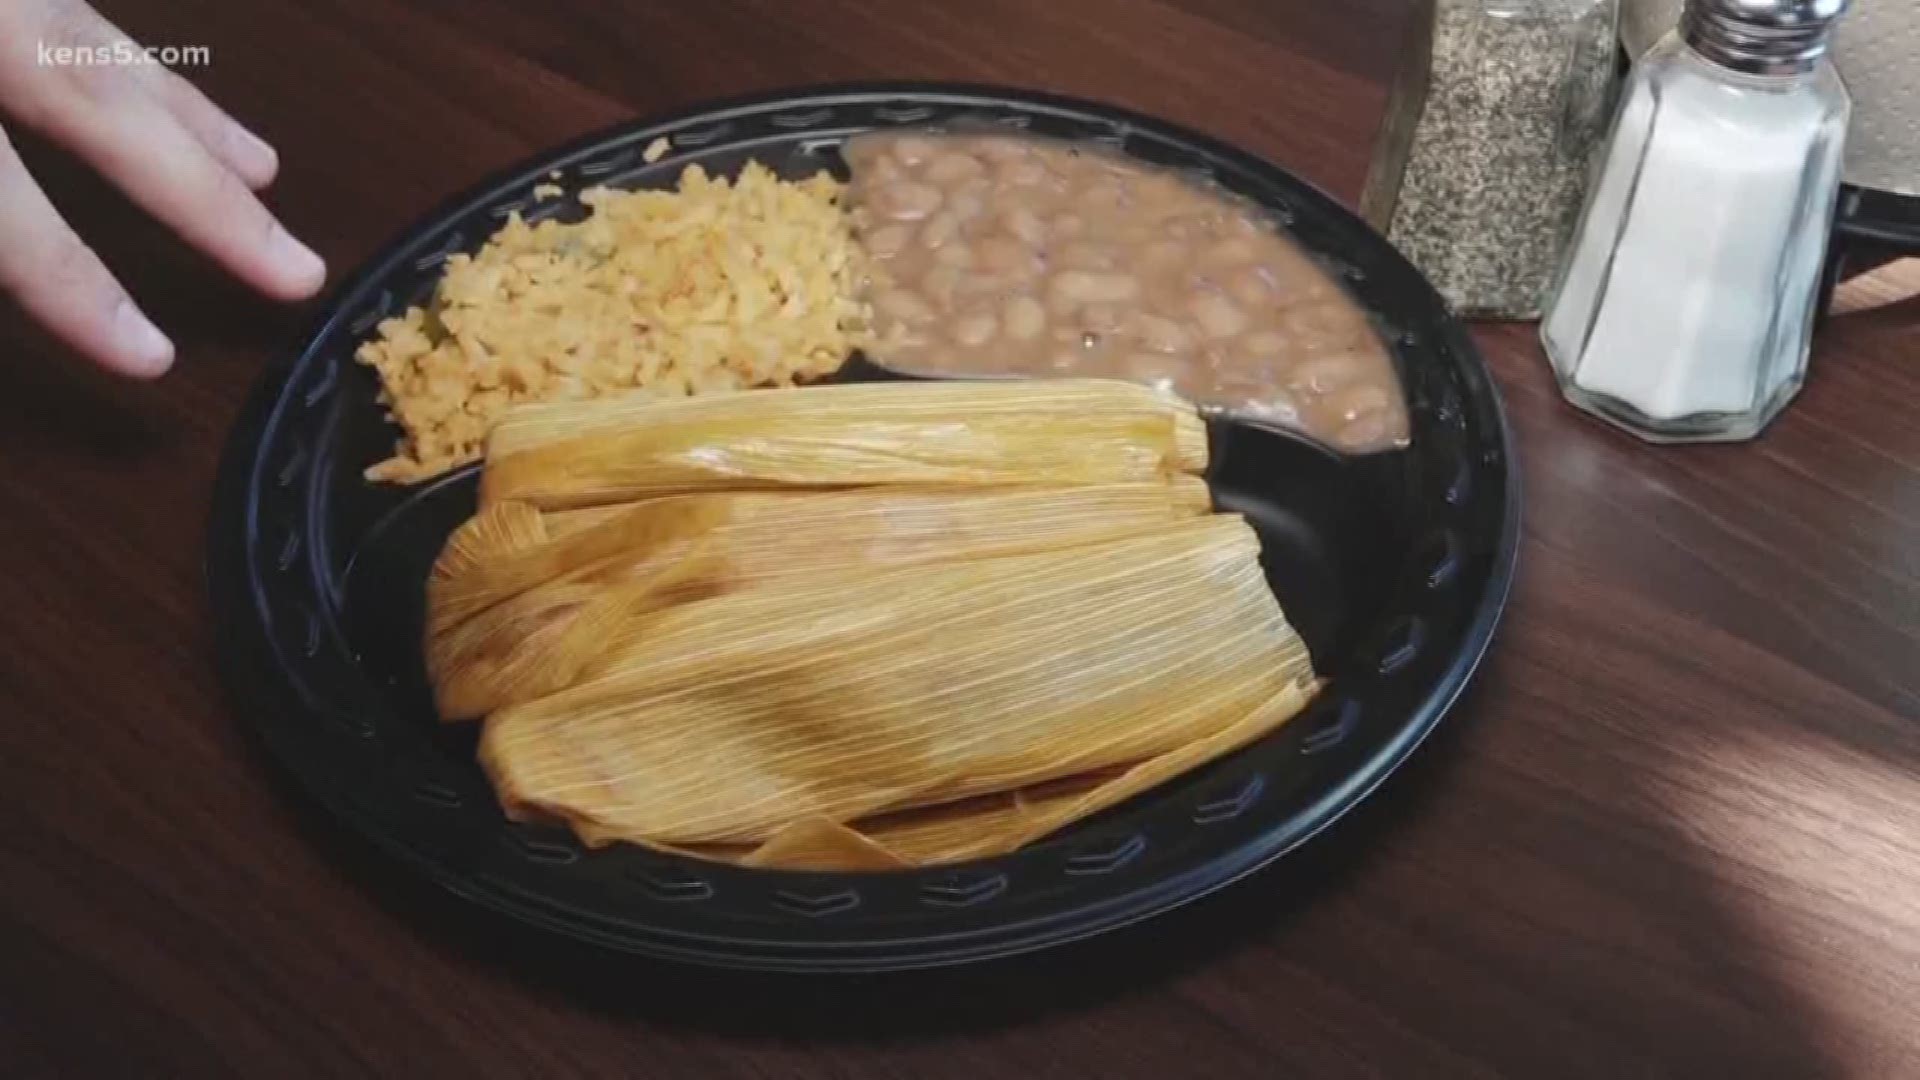 Bill Miller Bar-B-Q has added something new to their menu, and it isn't barbecue.You can now buy tamales there!